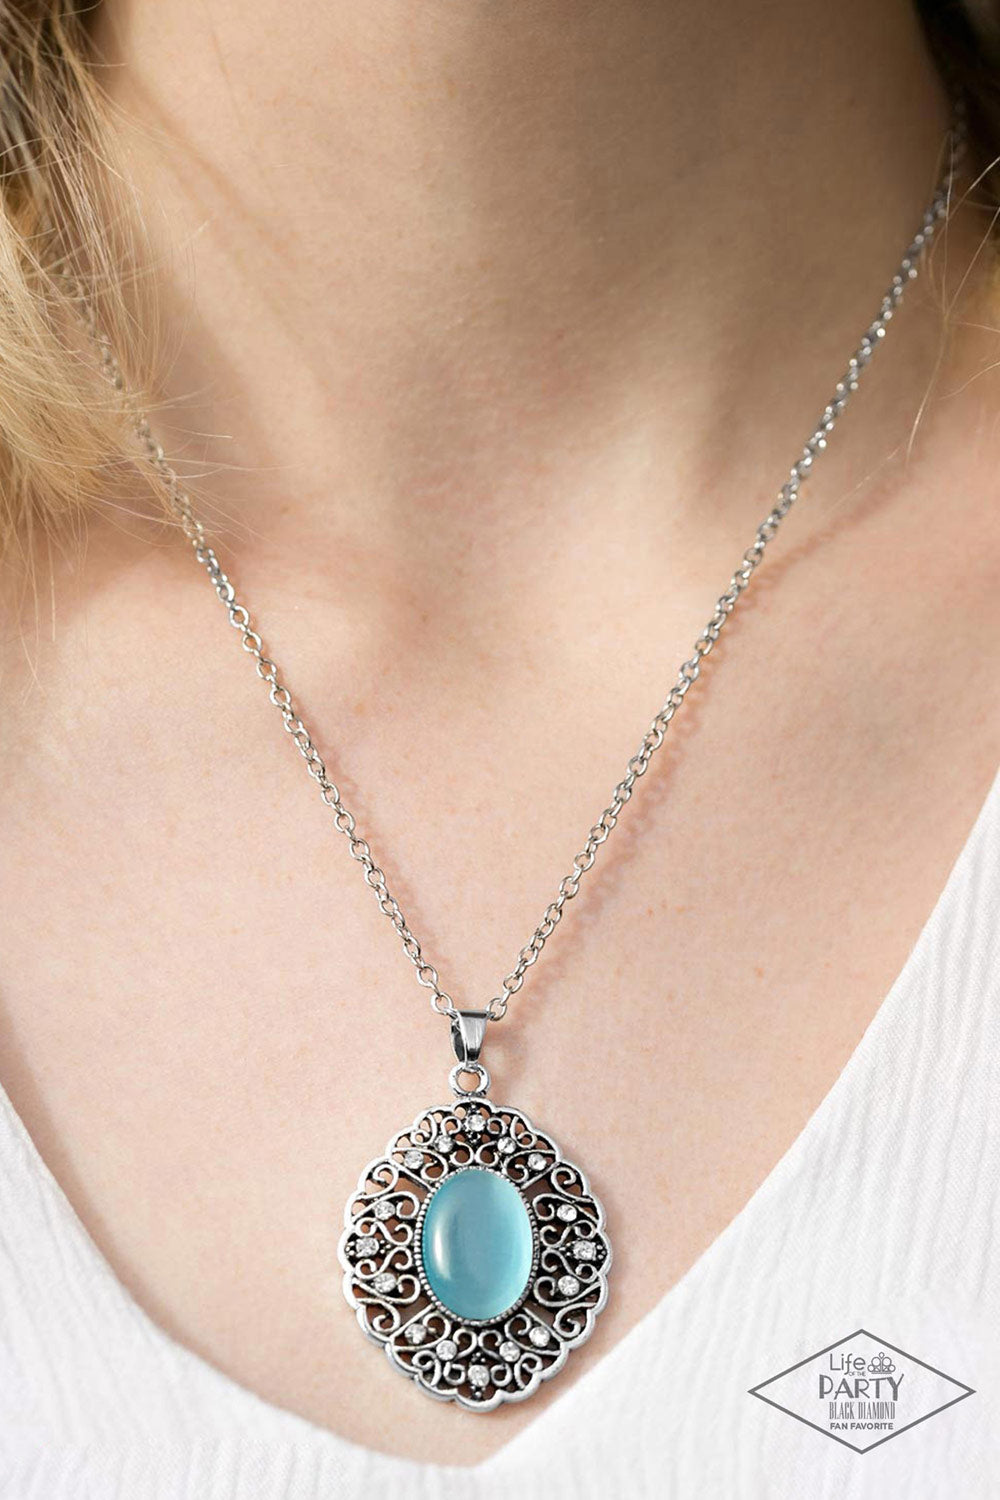 HEART OF GLACE - BLUE OVAL MOONSTONE DAINTY NECKLACE